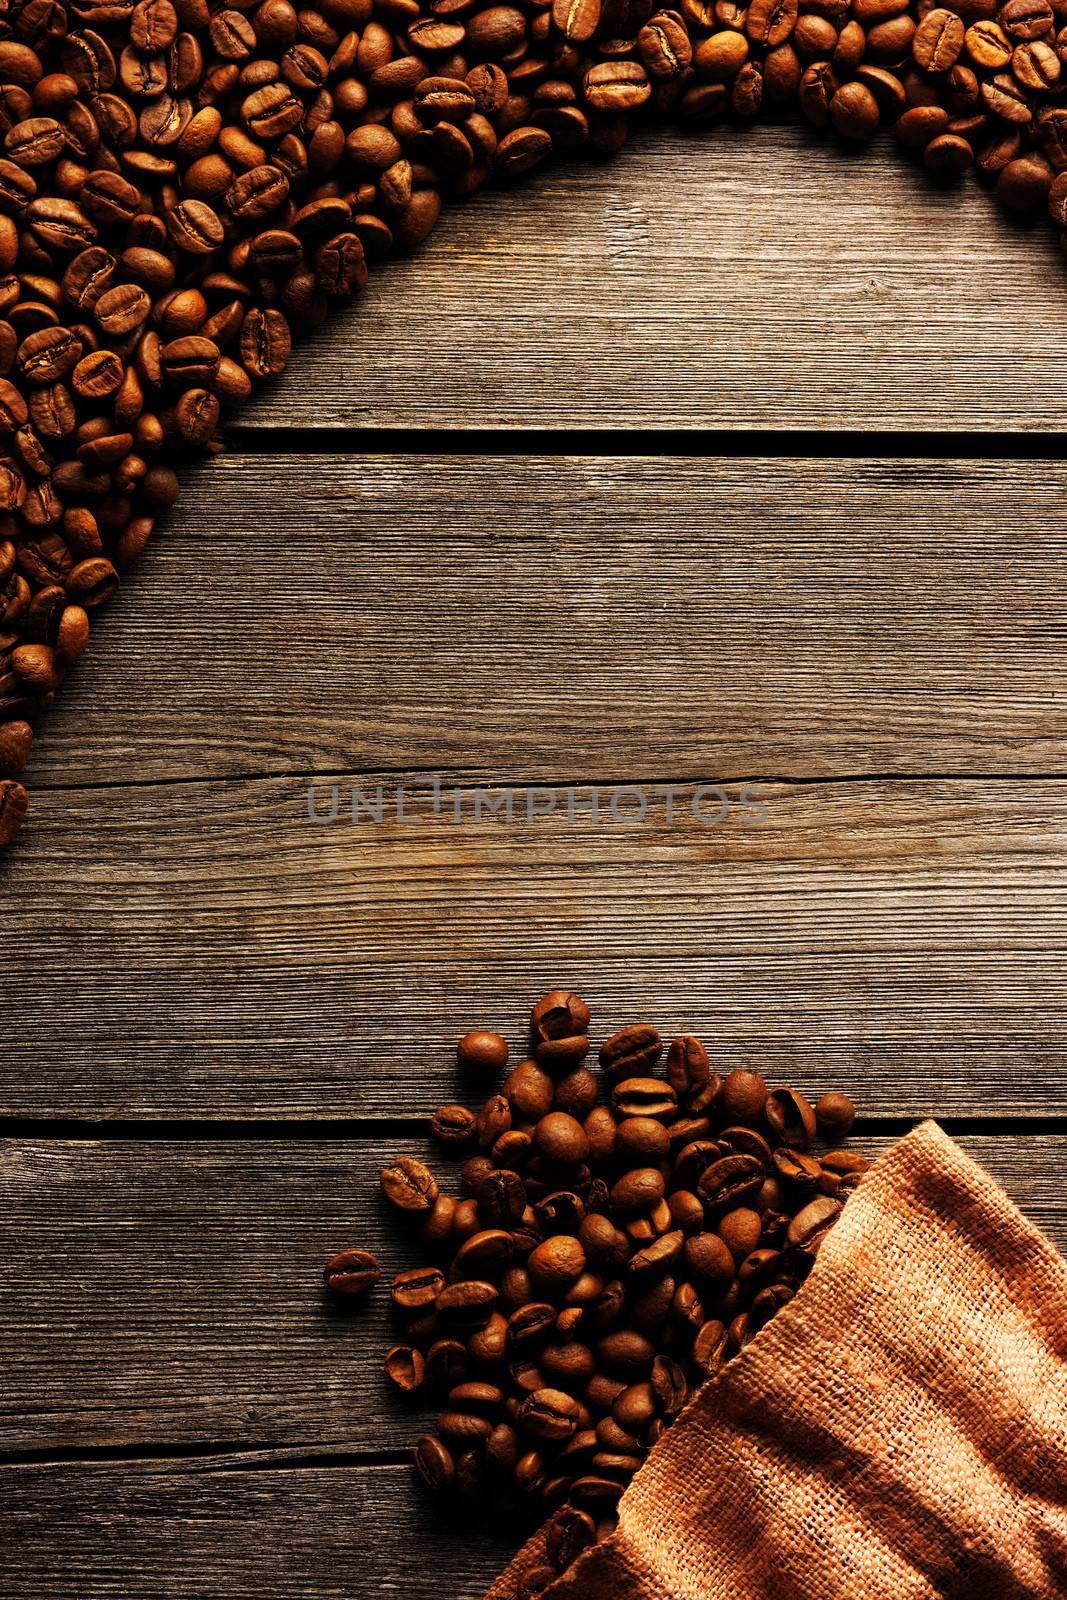 Coffee beans and bag over wooden background